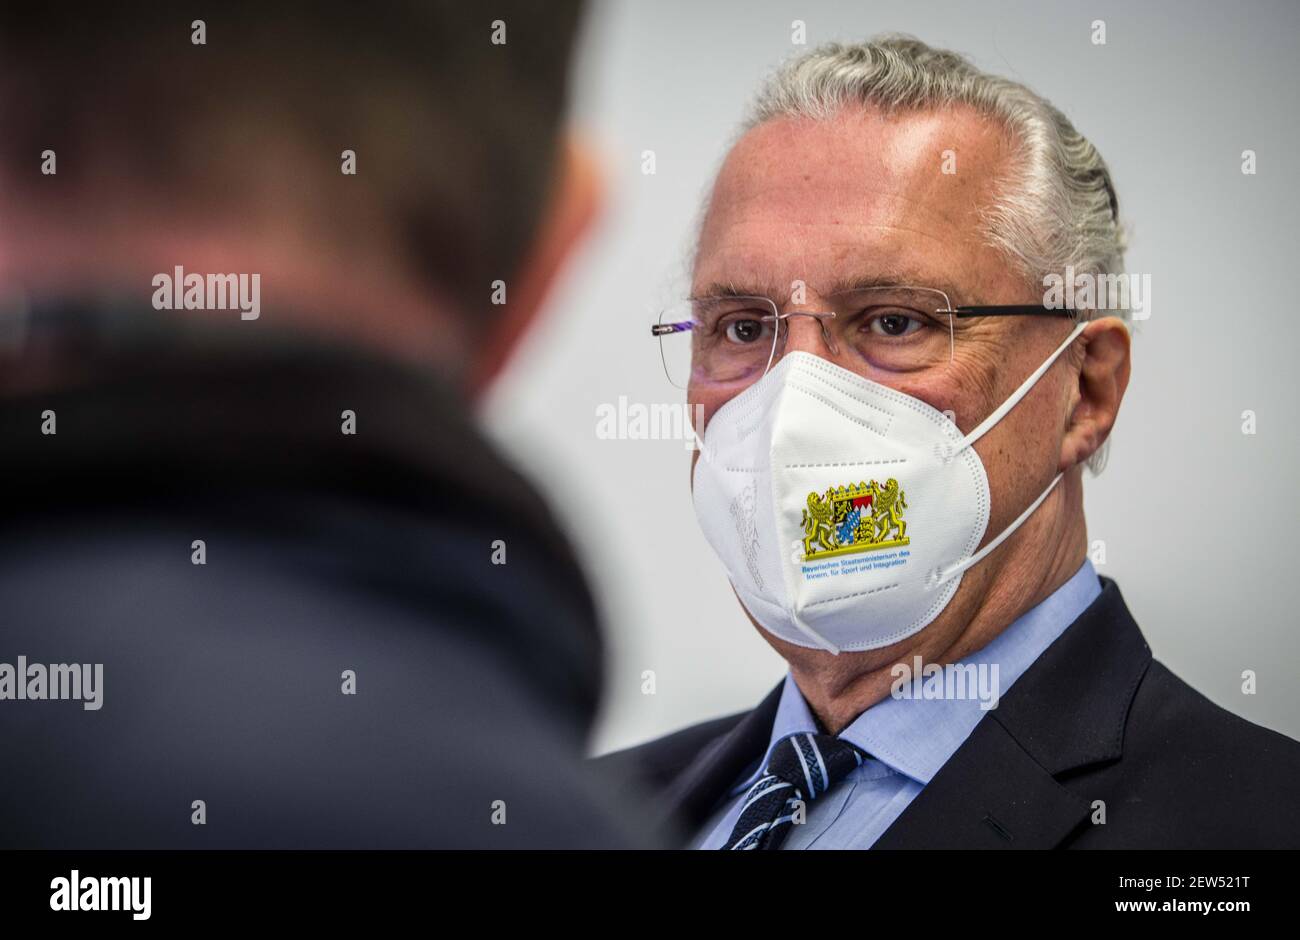 Munich, Bavaria, Germany. 2nd Mar, 2021. JOACHIM HERRMANN, Interior Minister of Bavaria meeting with police officers to kick off the Covid vaccination program. Starting with some 10,000 doses of the AstraZeneca Covid-19 vaccine, the Bavarian Police has begun vaccinating its Bereitschaftspolizei and Einsatzeinheiten- specialized police units that deal with demonstrations, riots, and other missions. Germany's vaccine program has been criticized for being extremely slow, with numerous nations surpassing not only percentage of the population vaccinated, but also absolute numbers as they vaccin Stock Photo